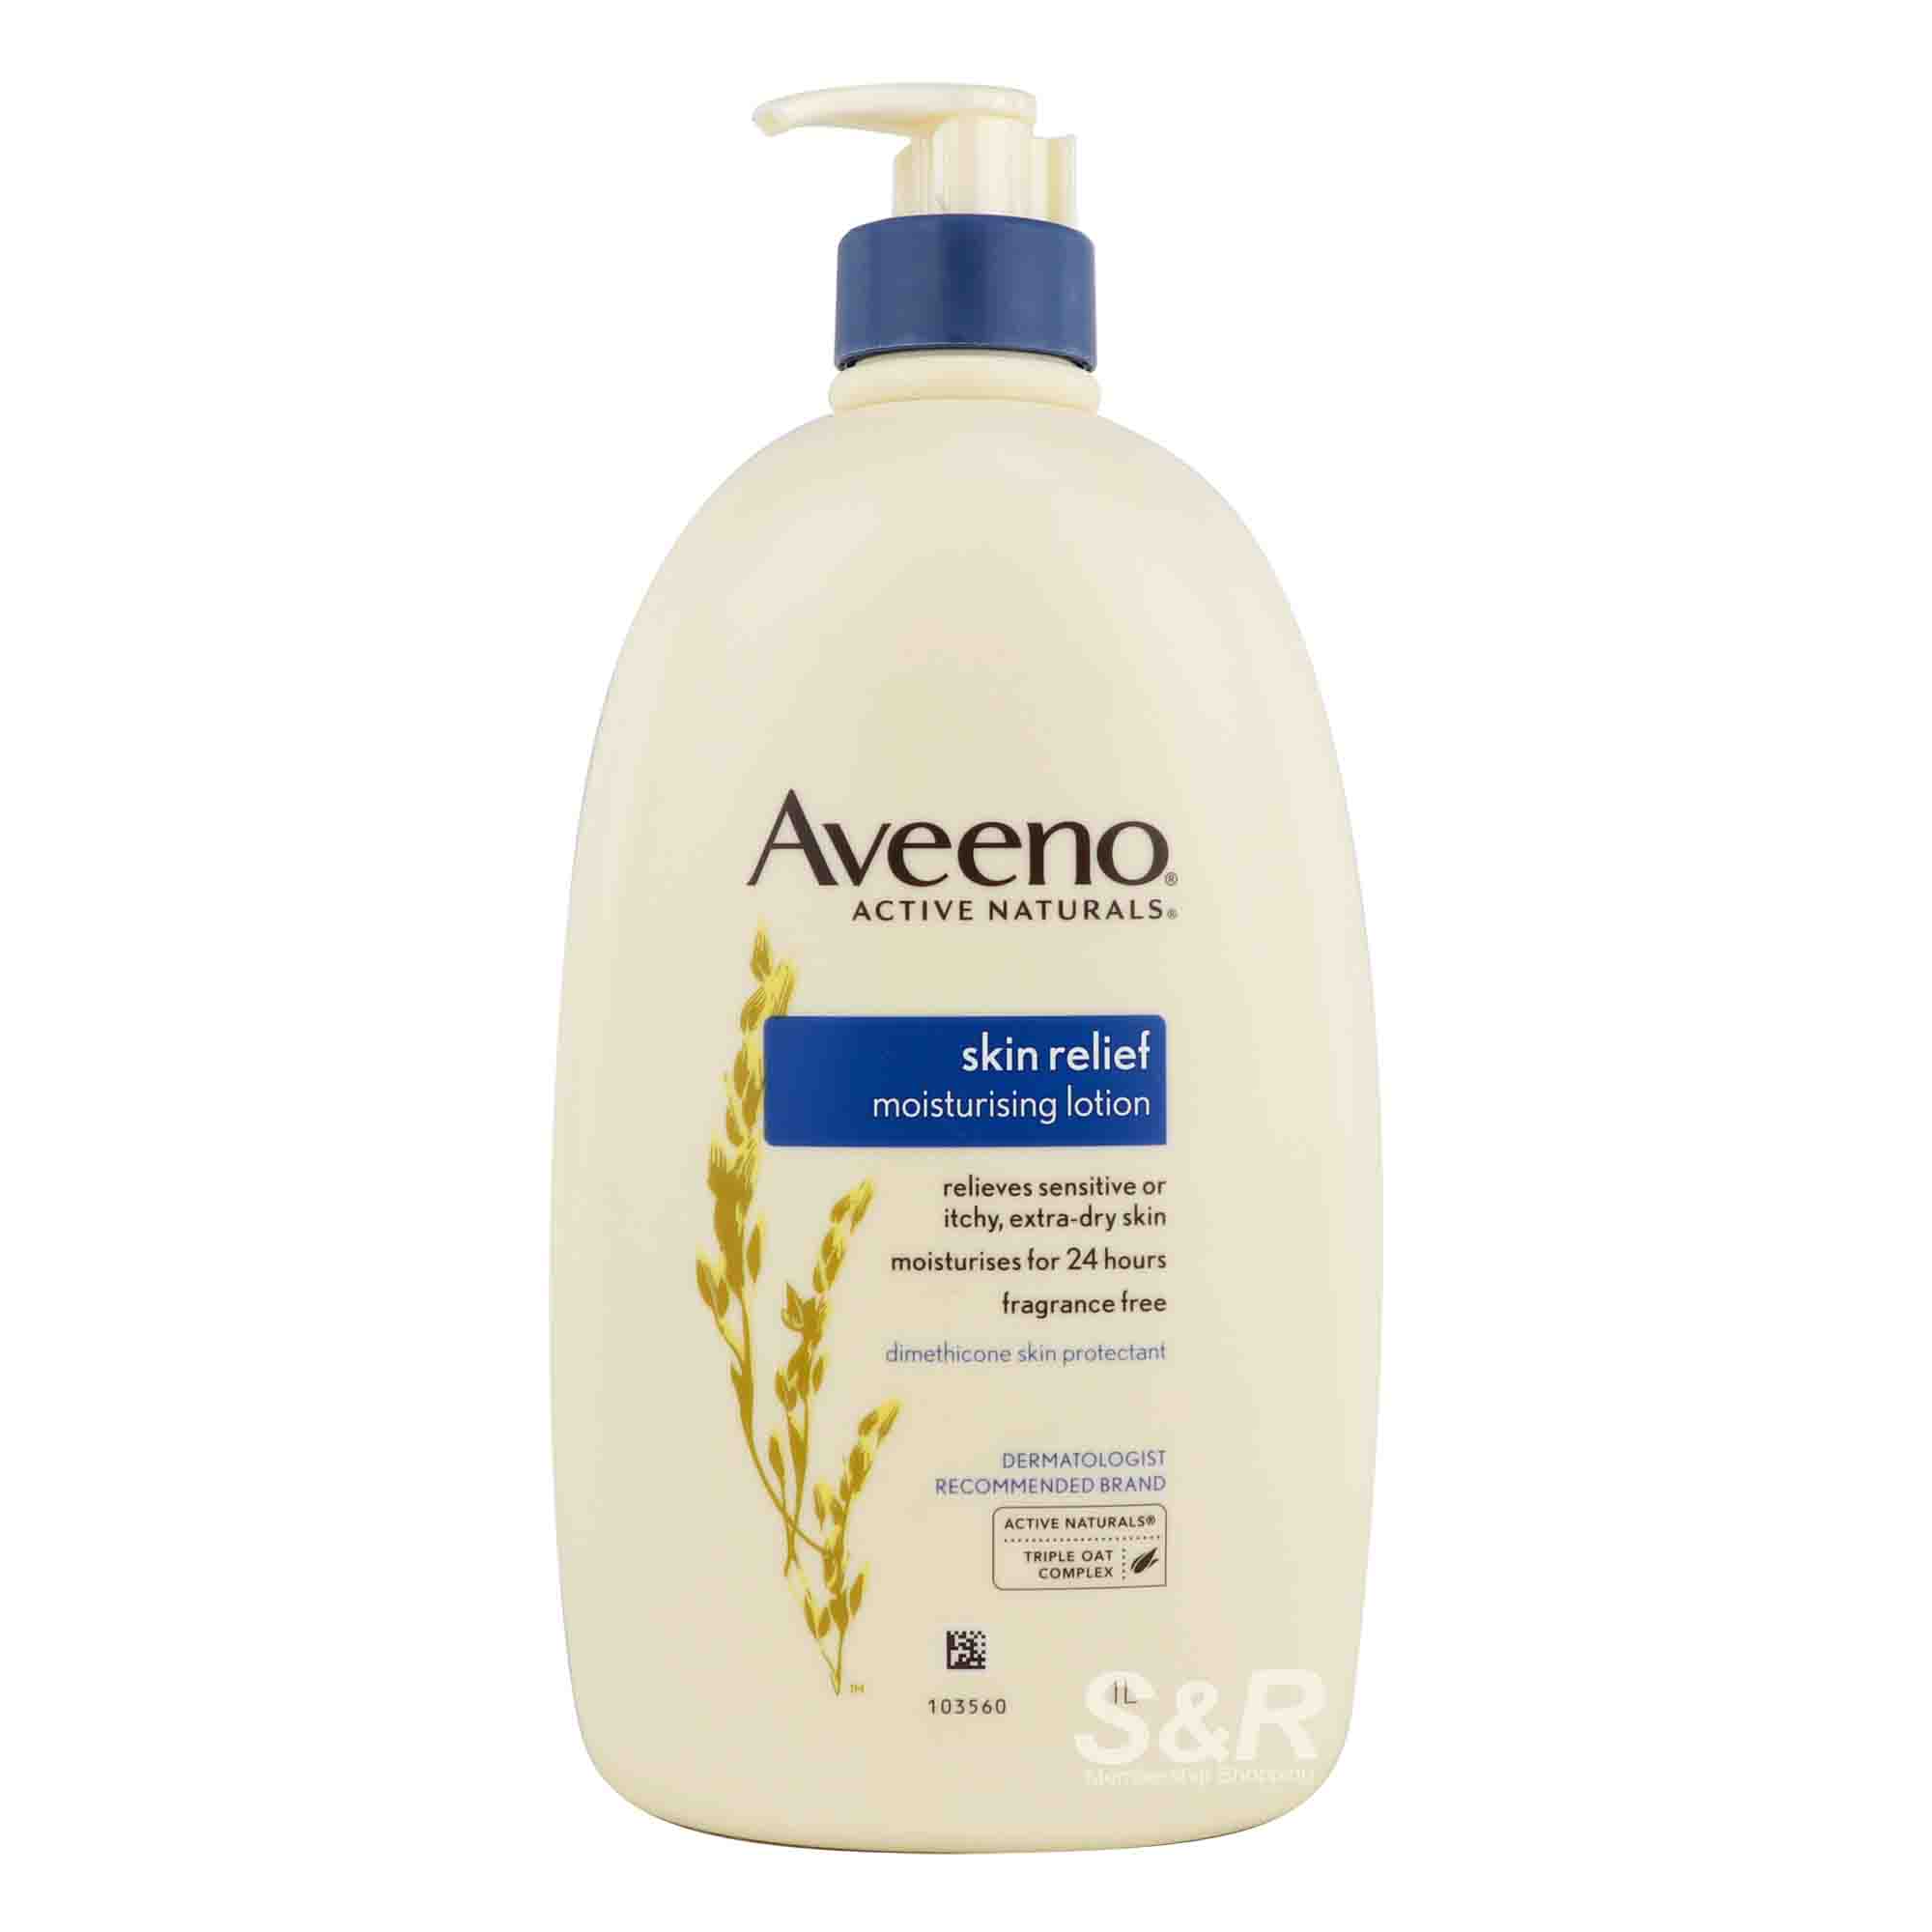 Aveeno Active Naturals Skin Relief Moisturizing Lotion 1L